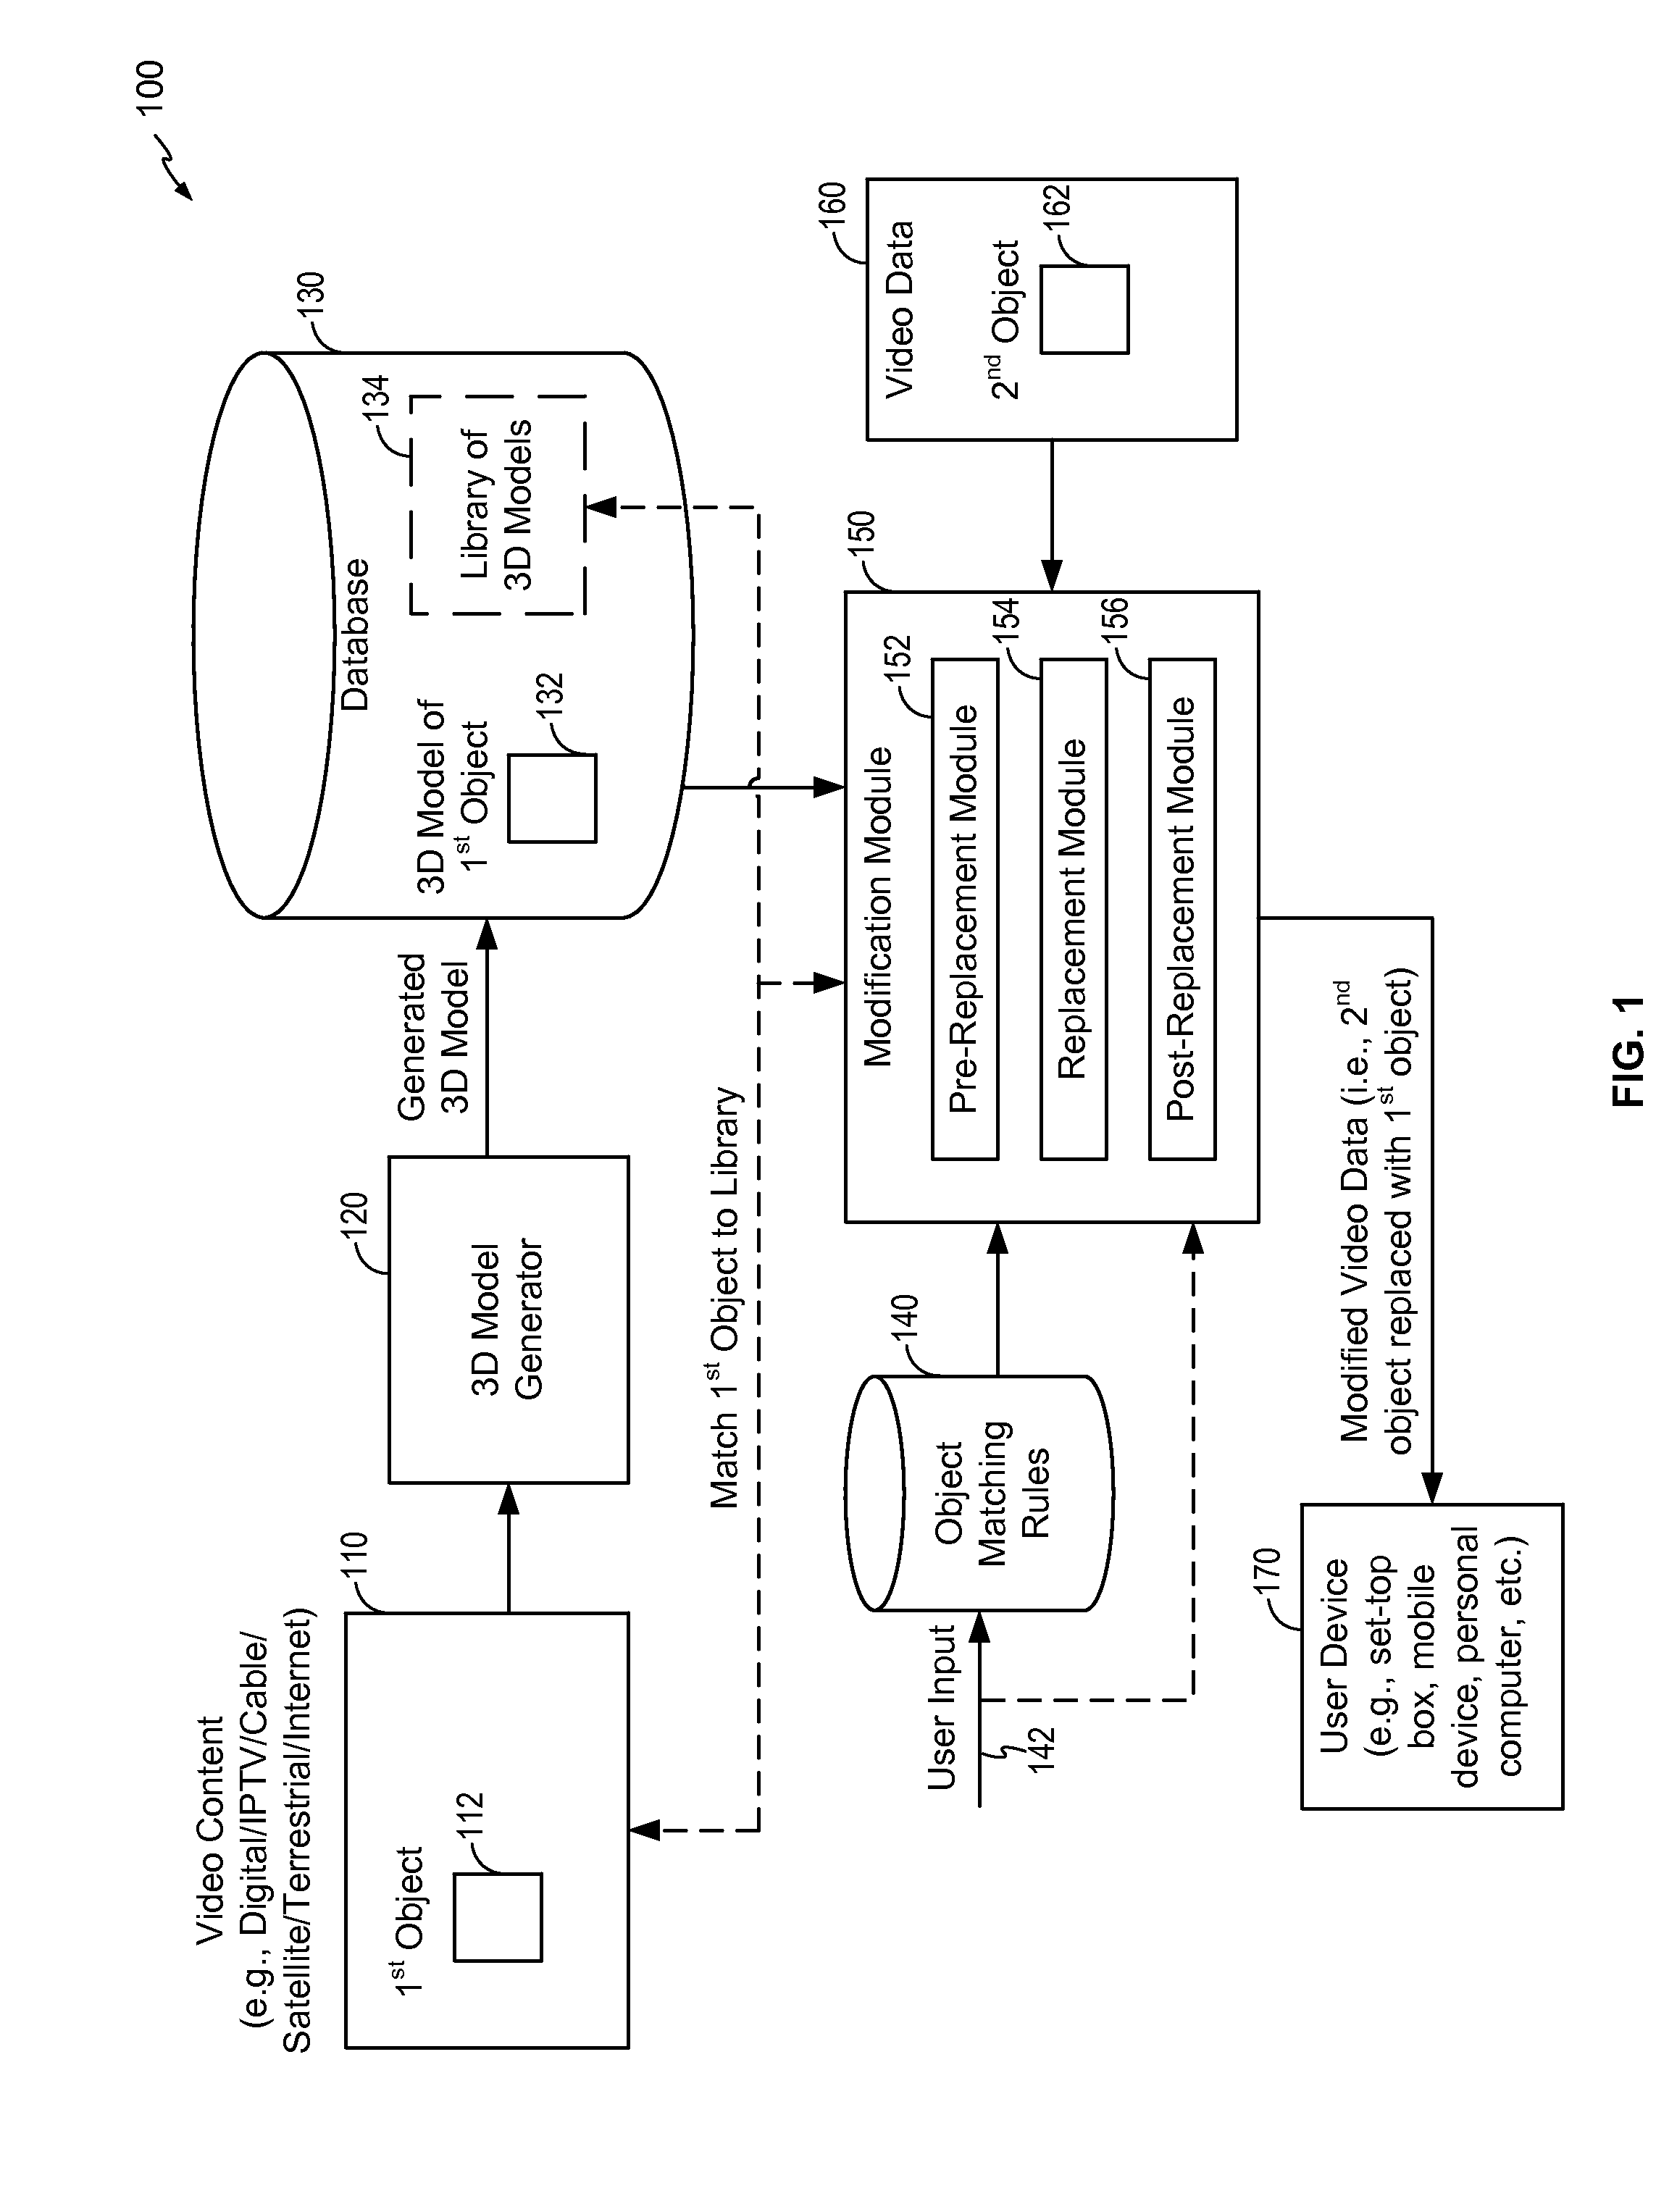 System and Method to Digitally Replace Objects in Images or Video